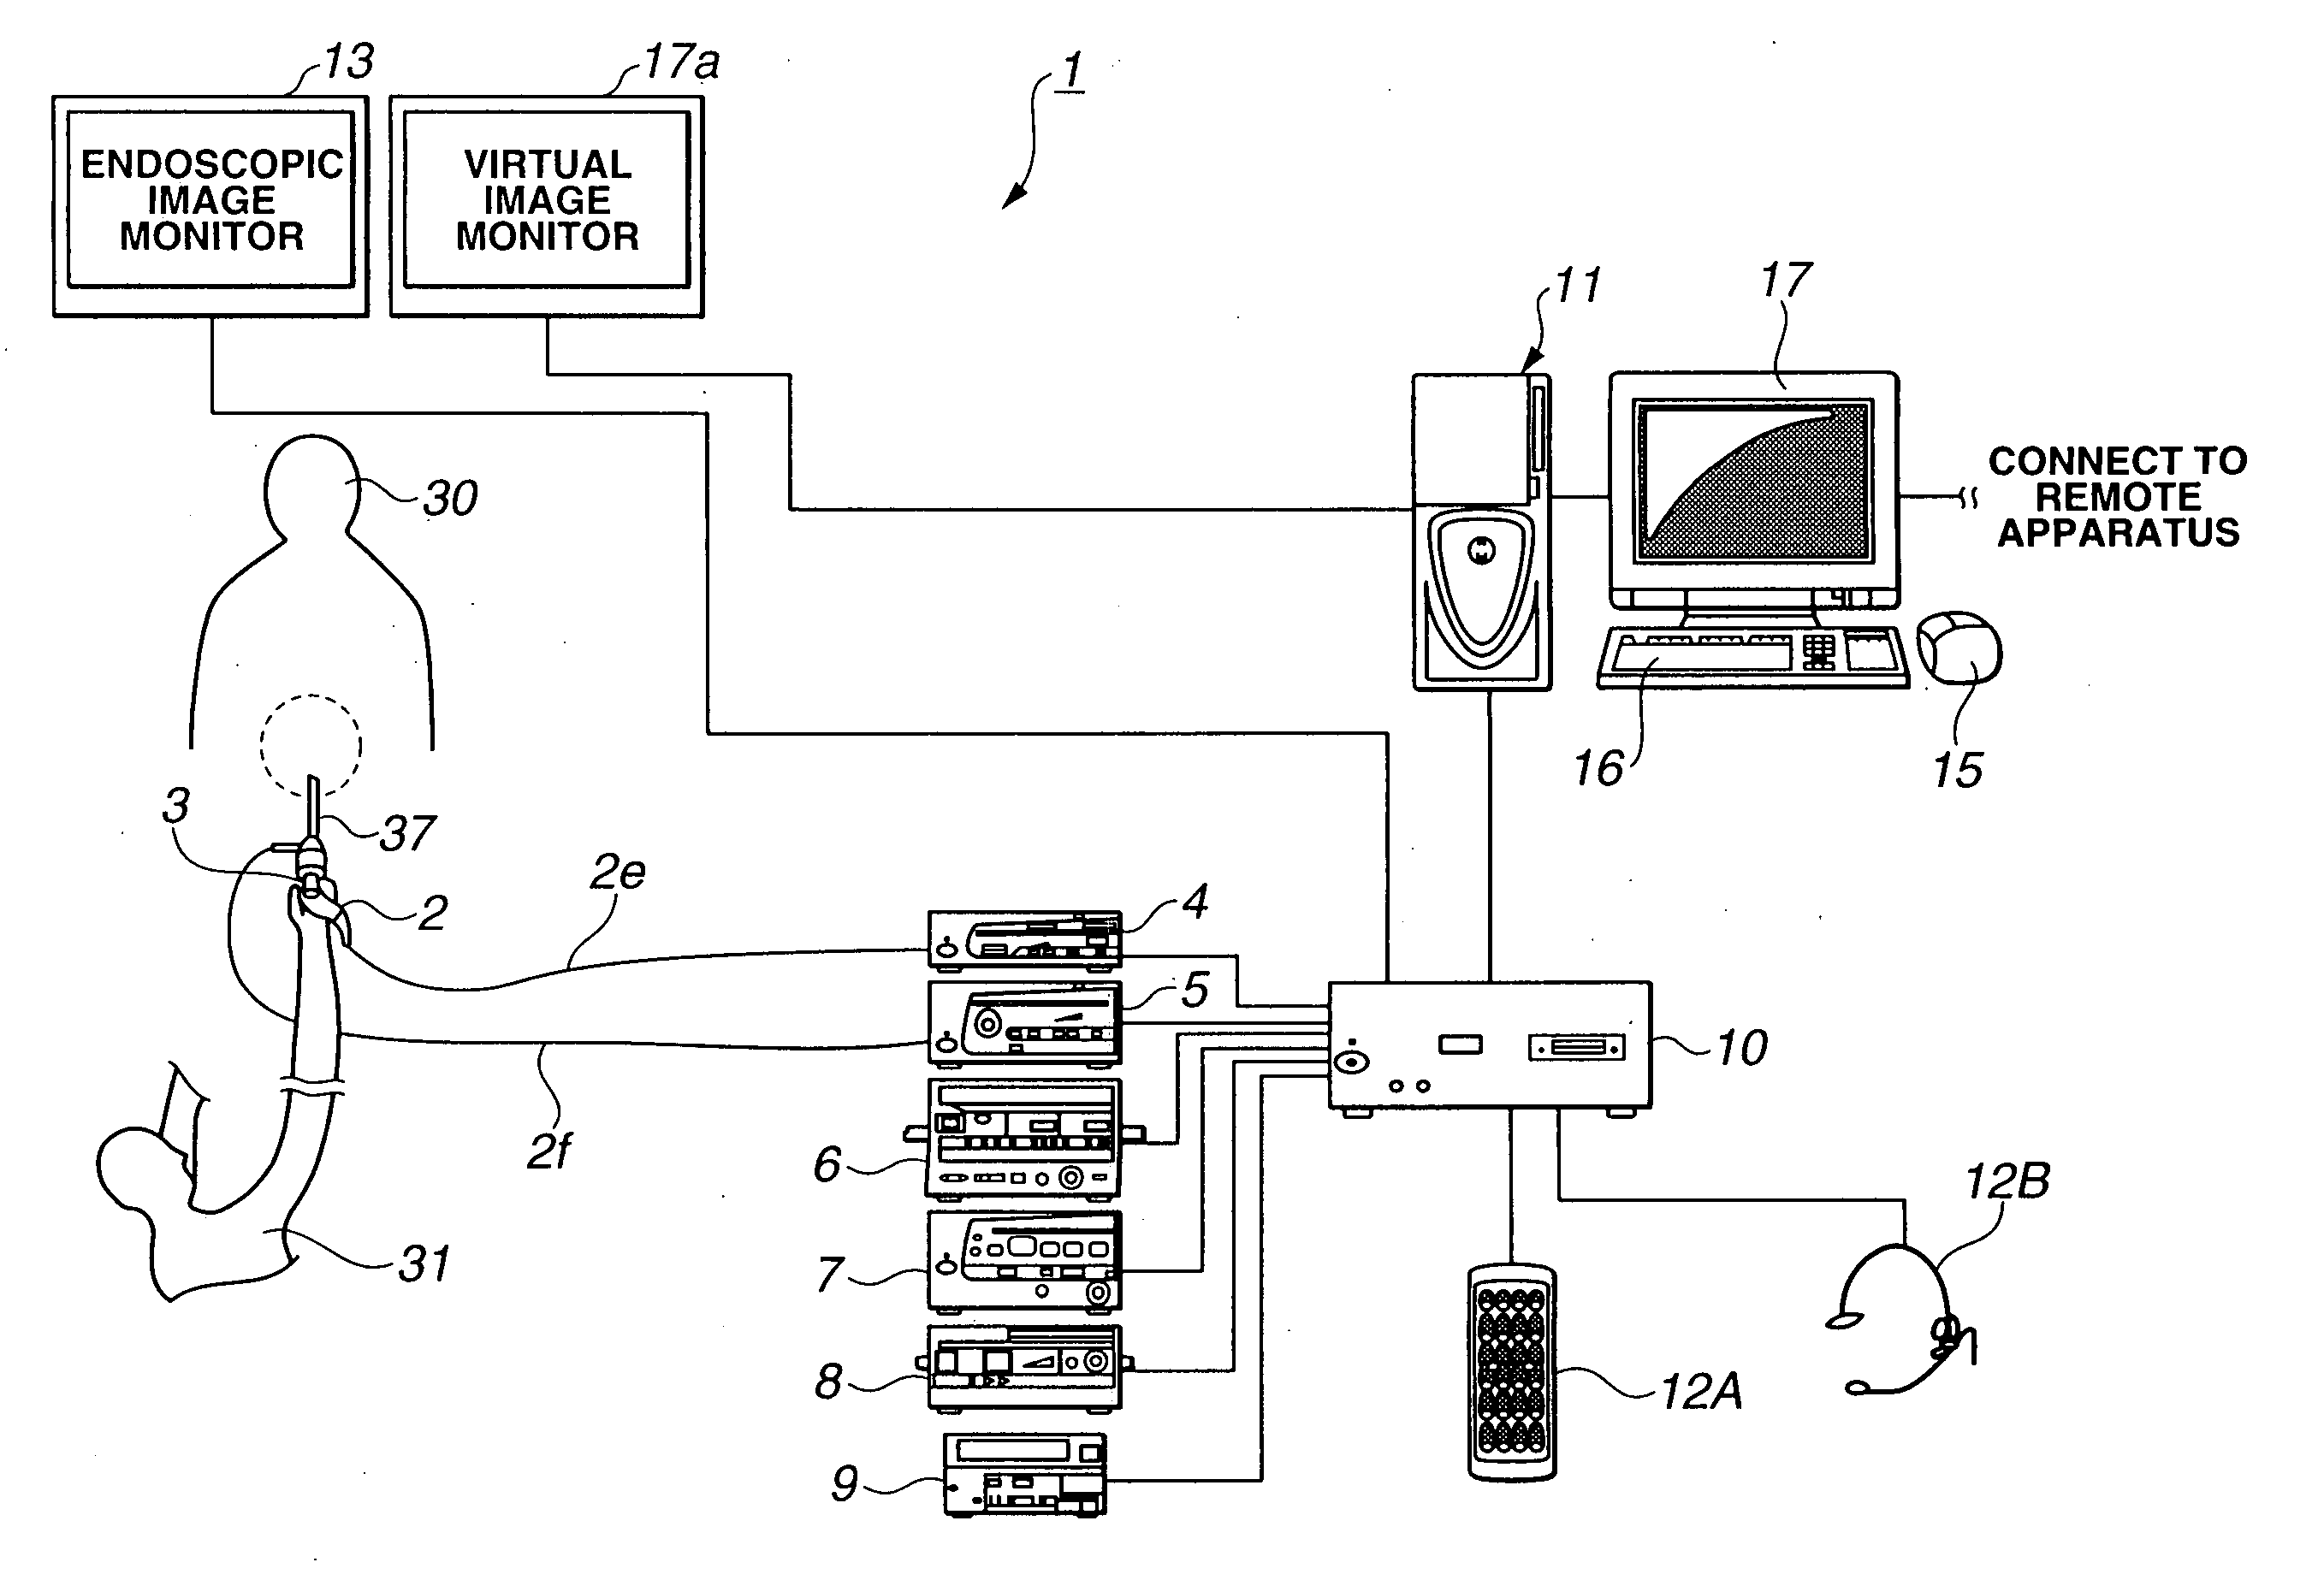 Medical procedure support system and method